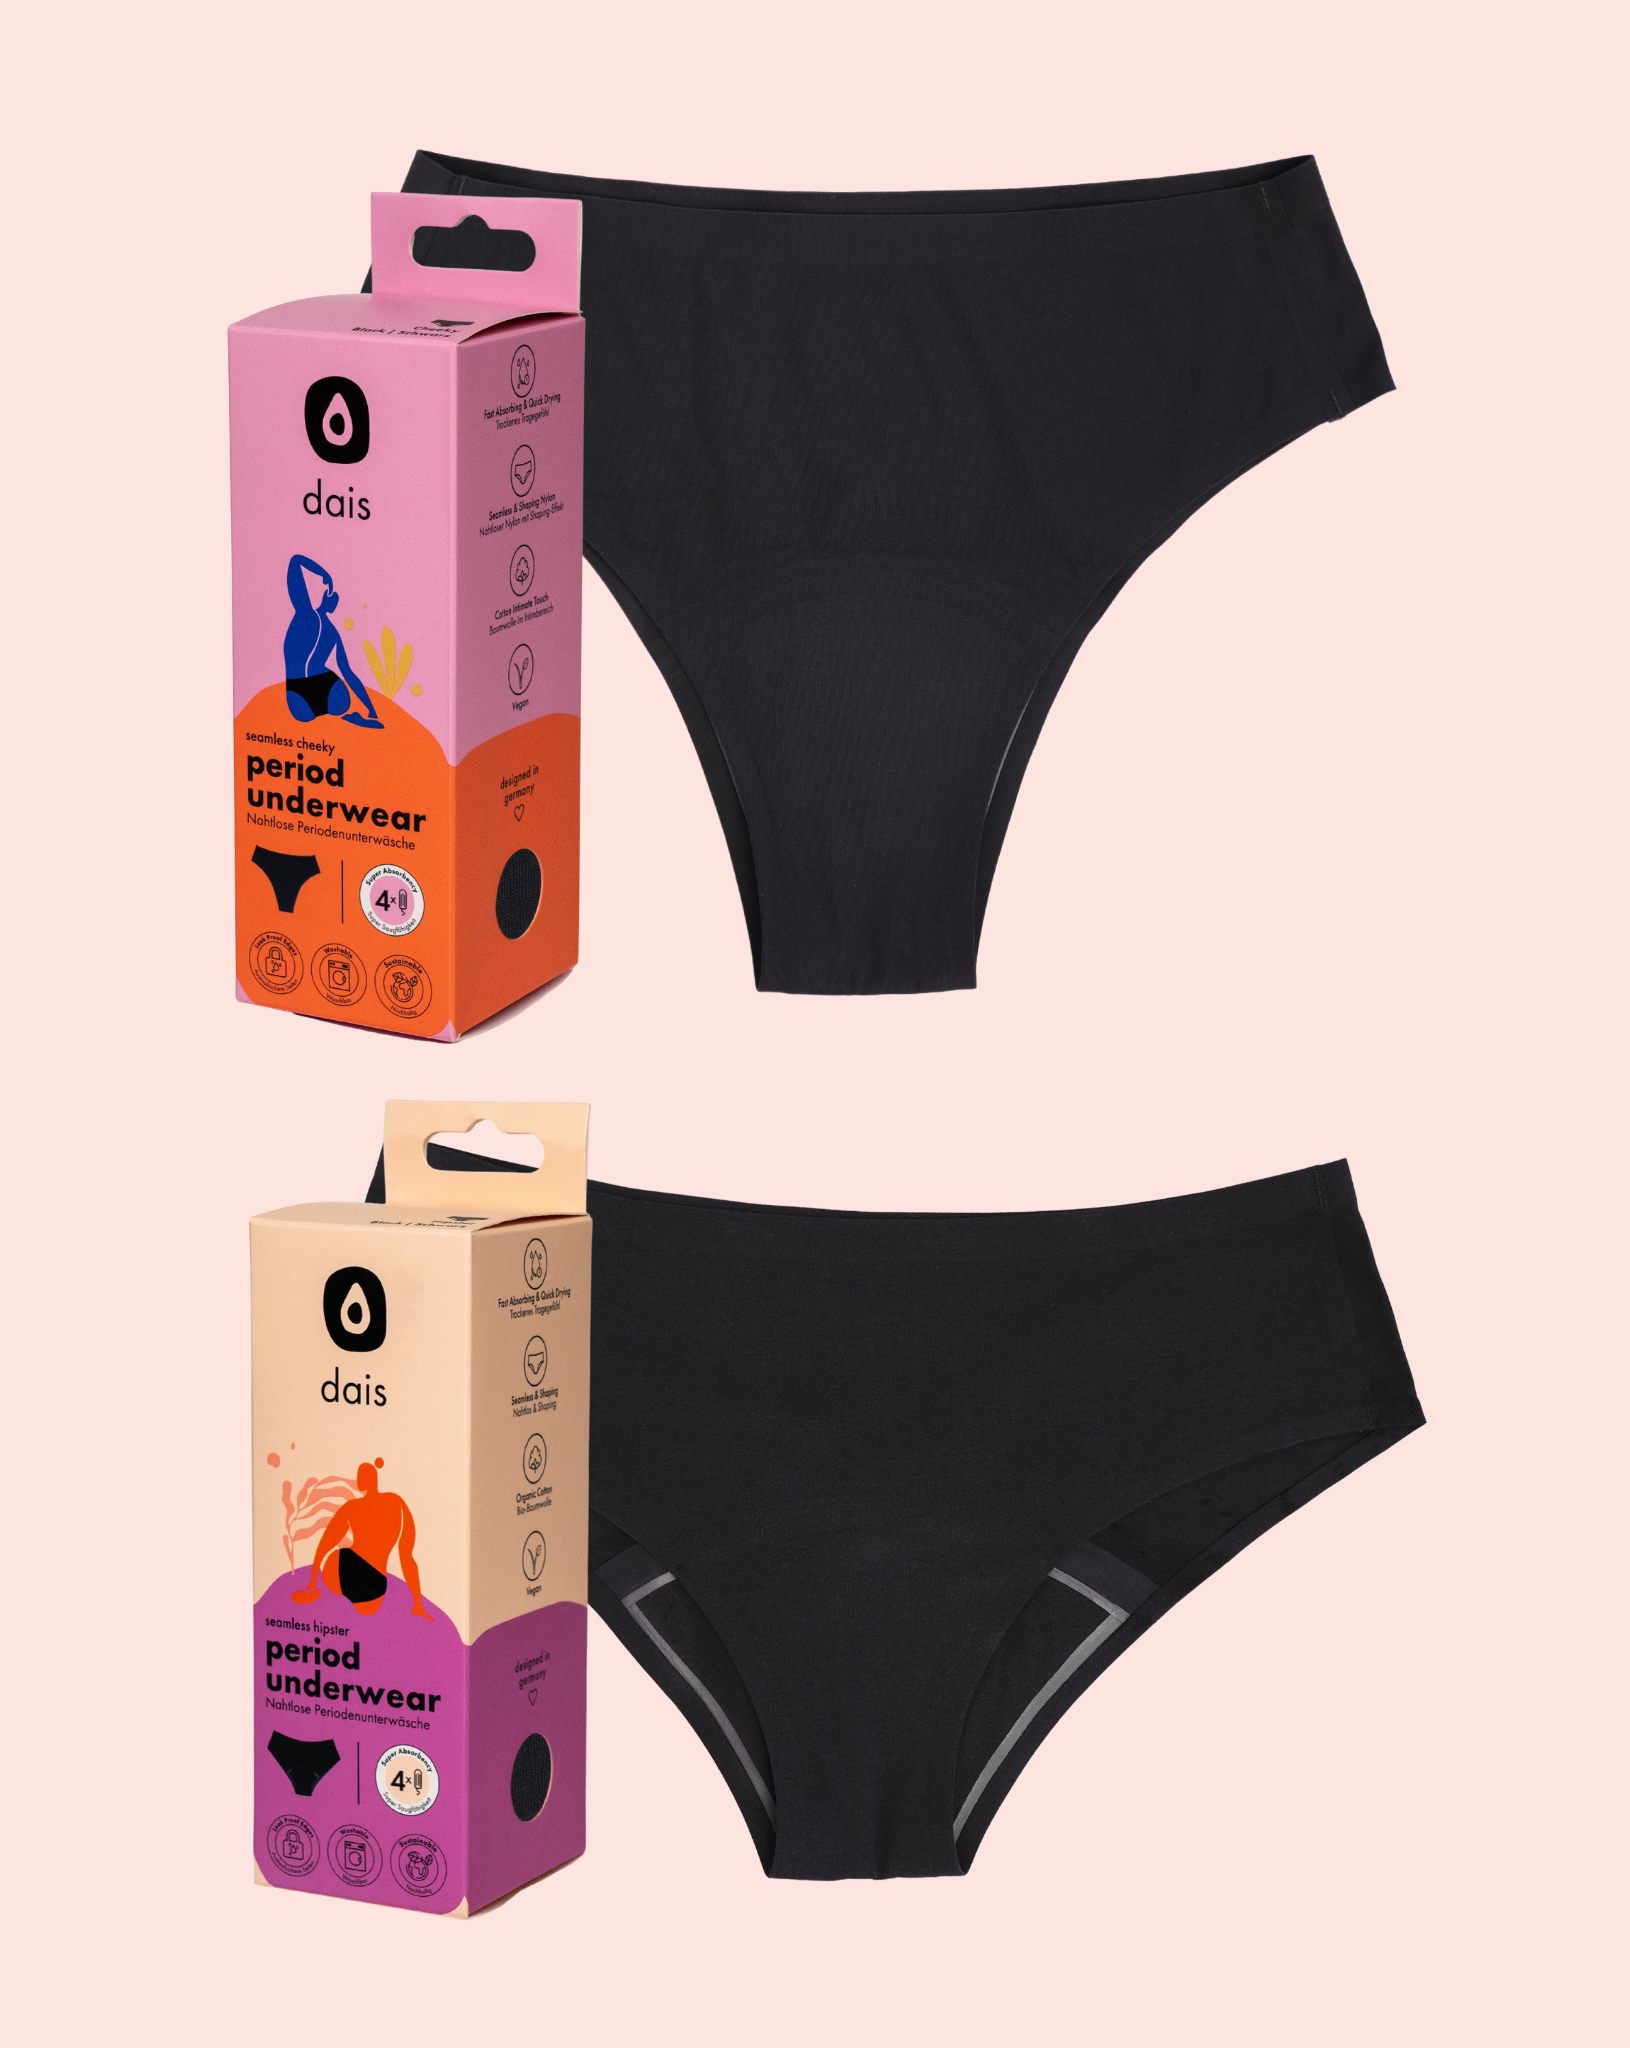 dais period underwear multipack Cheeky and Hipster featured on different models. One is the cheeky dais period underwear made of nylon and the other is the hipster dais period underwear made of organic cotton.